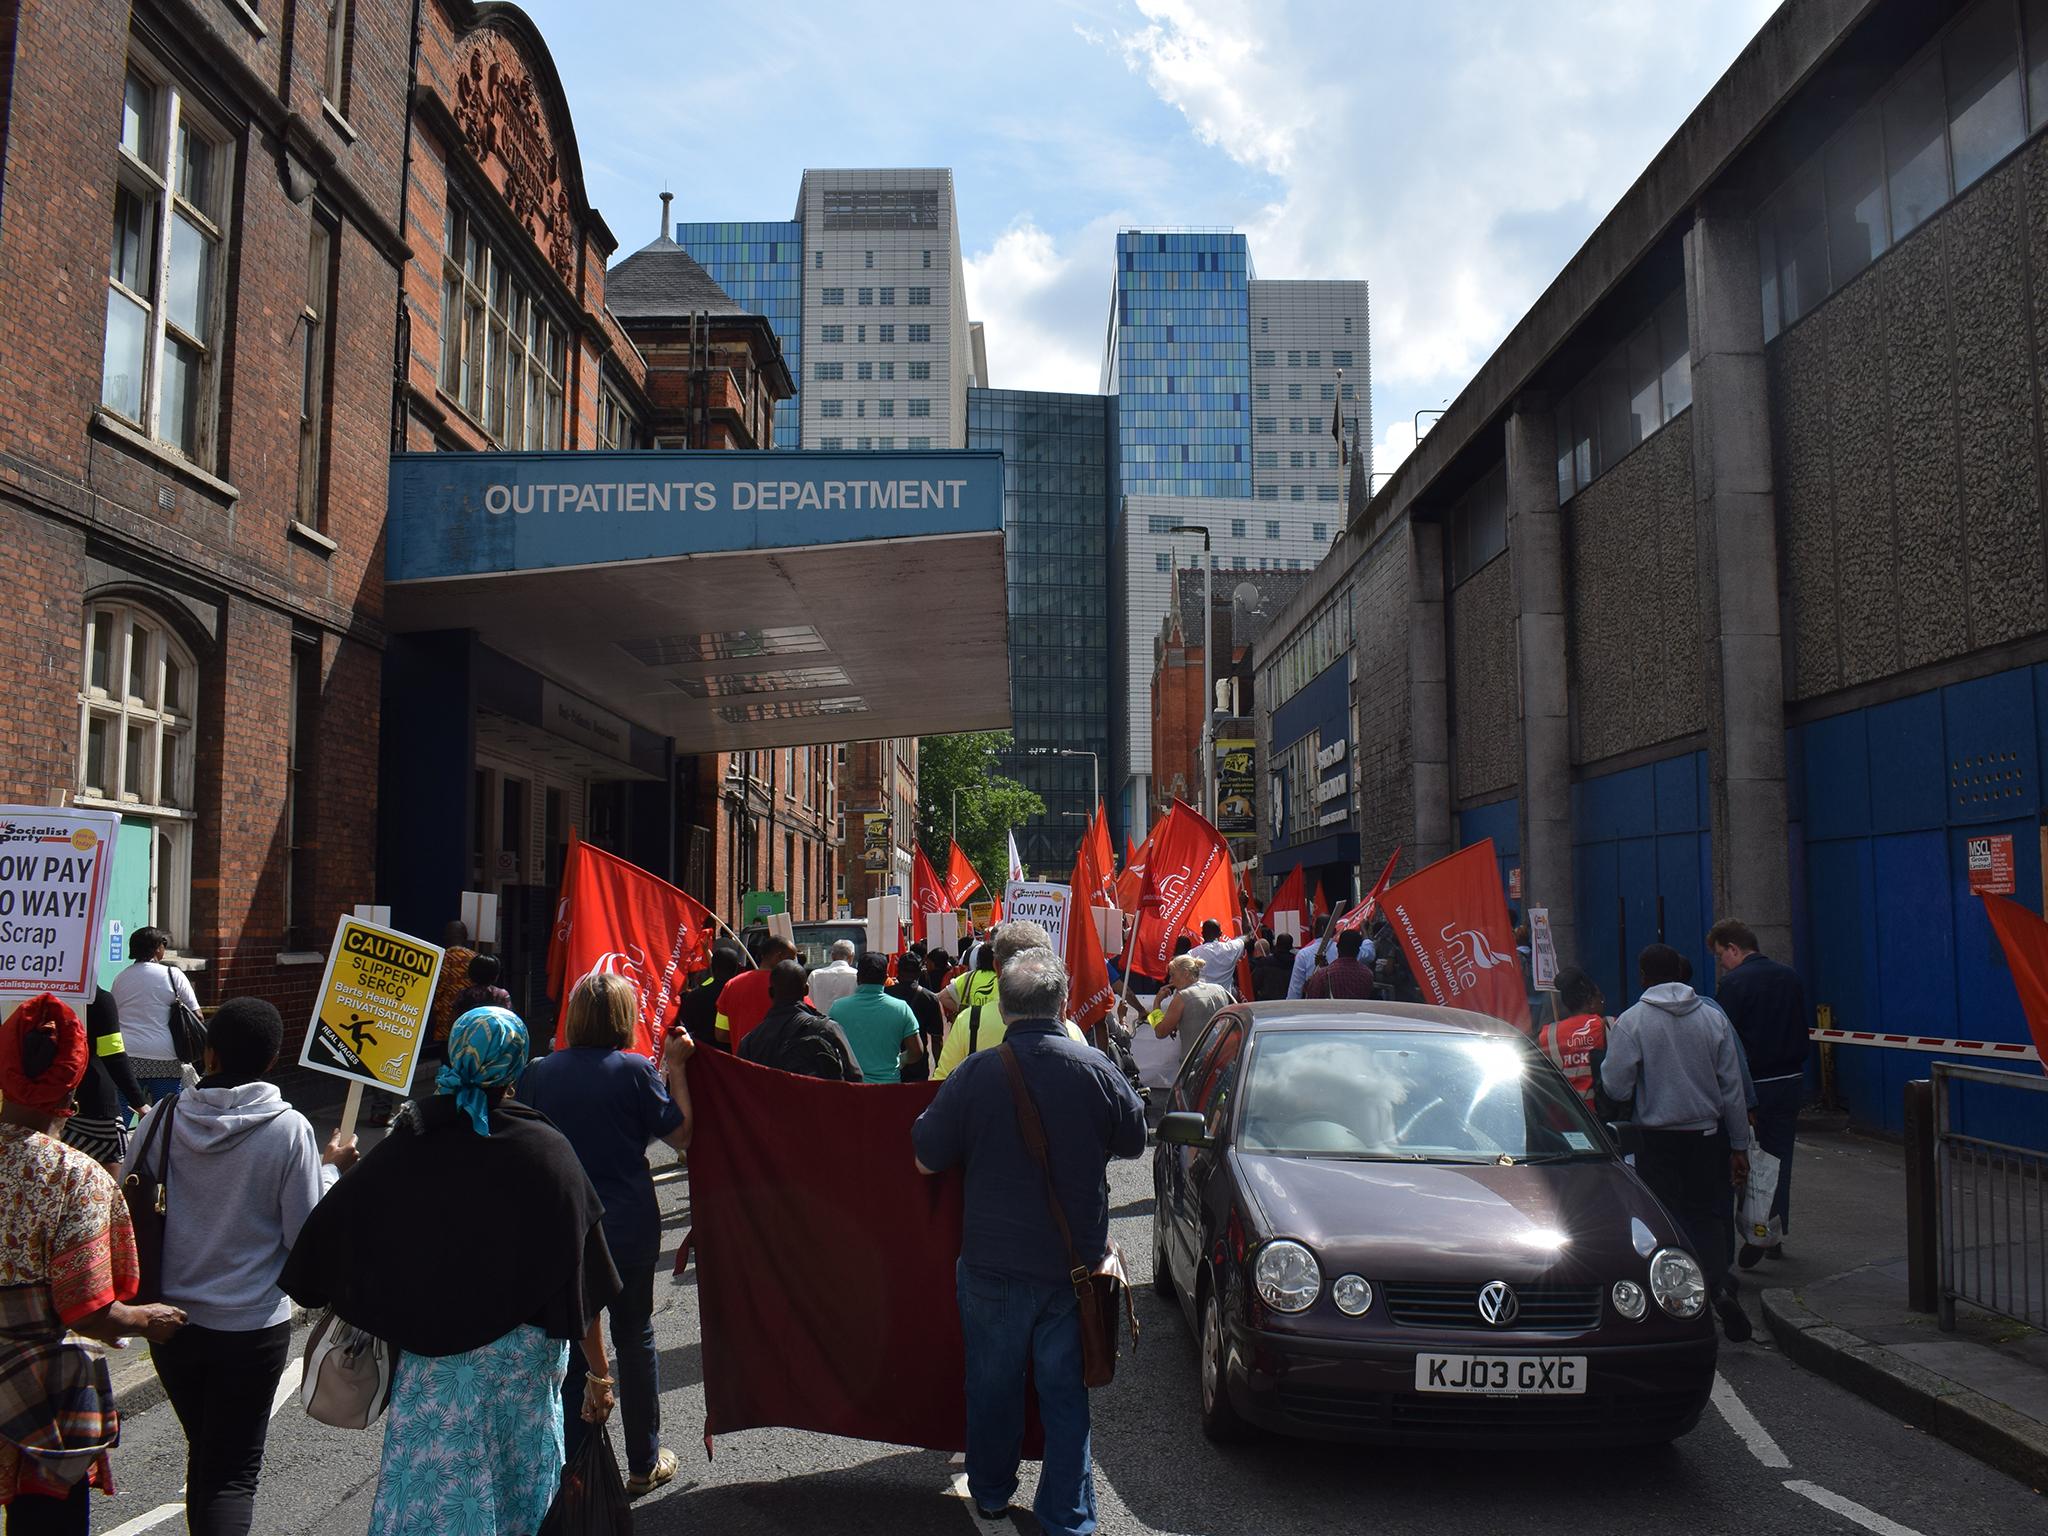 Cleaners, porters, caterers and security staff from St Barts Trust’s hospitals have begun their first period of official industrial action